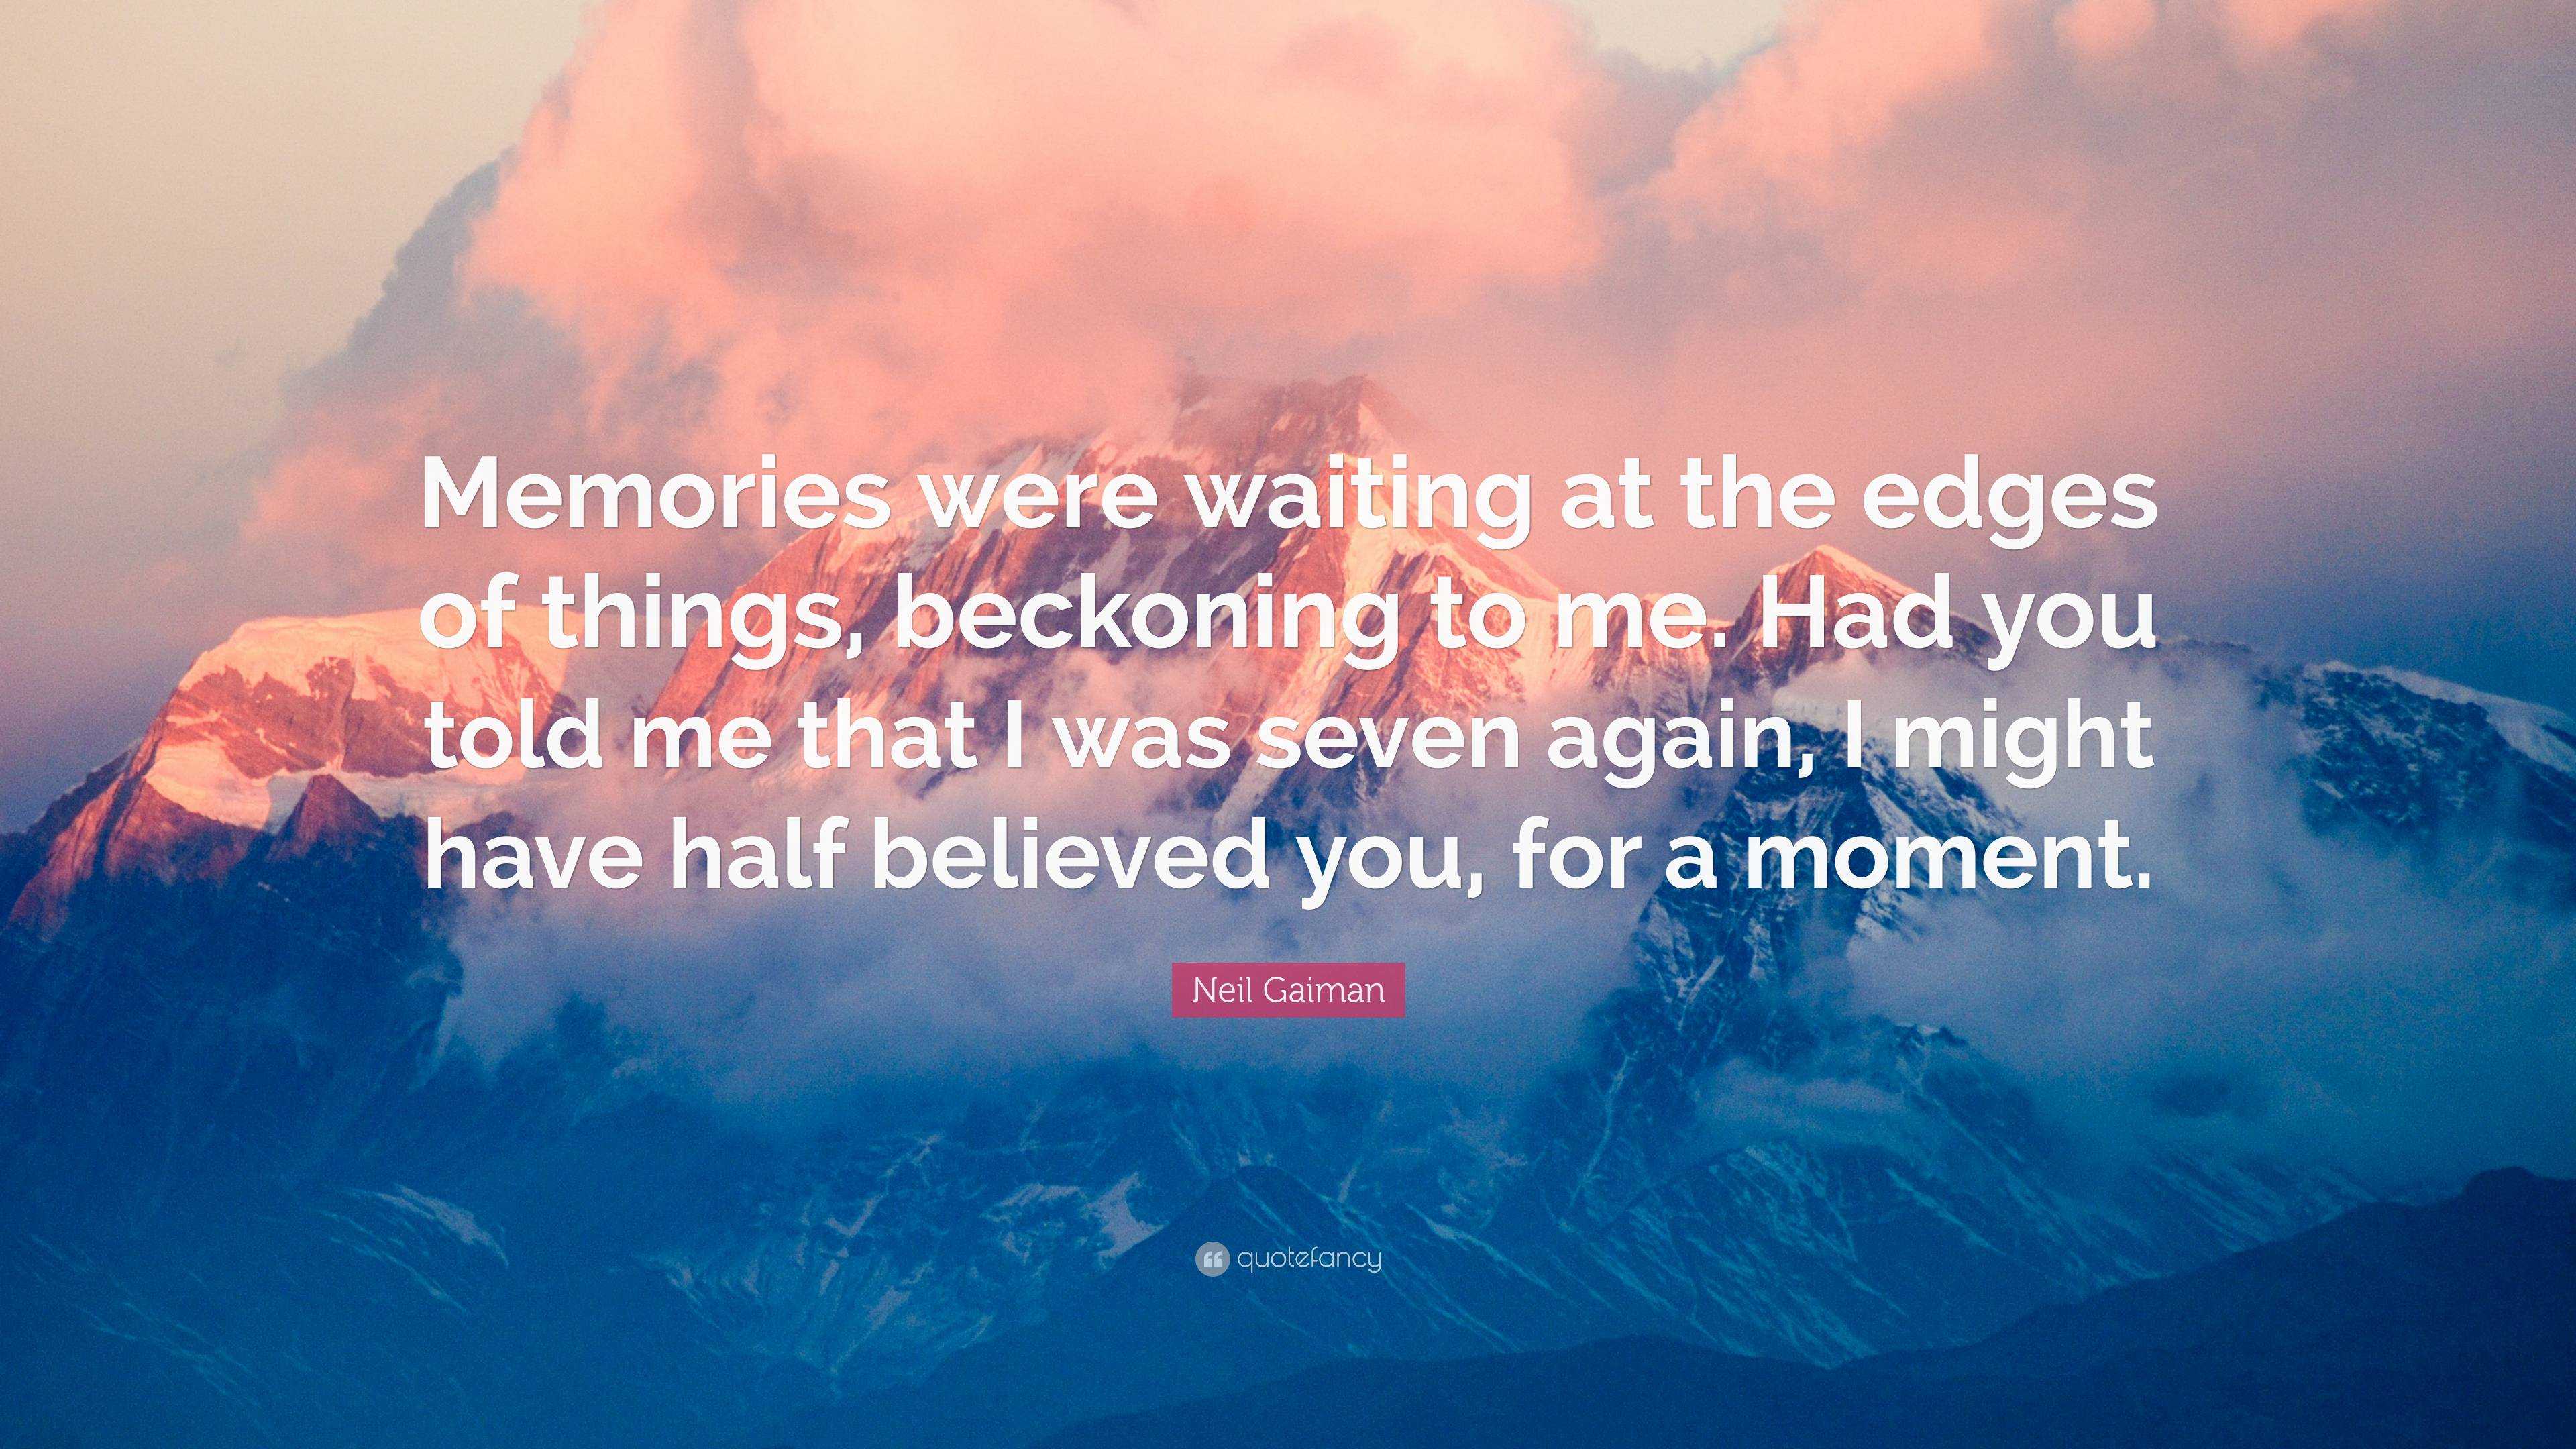 Neil Gaiman Quote: “Memories were waiting at the edges of things ...